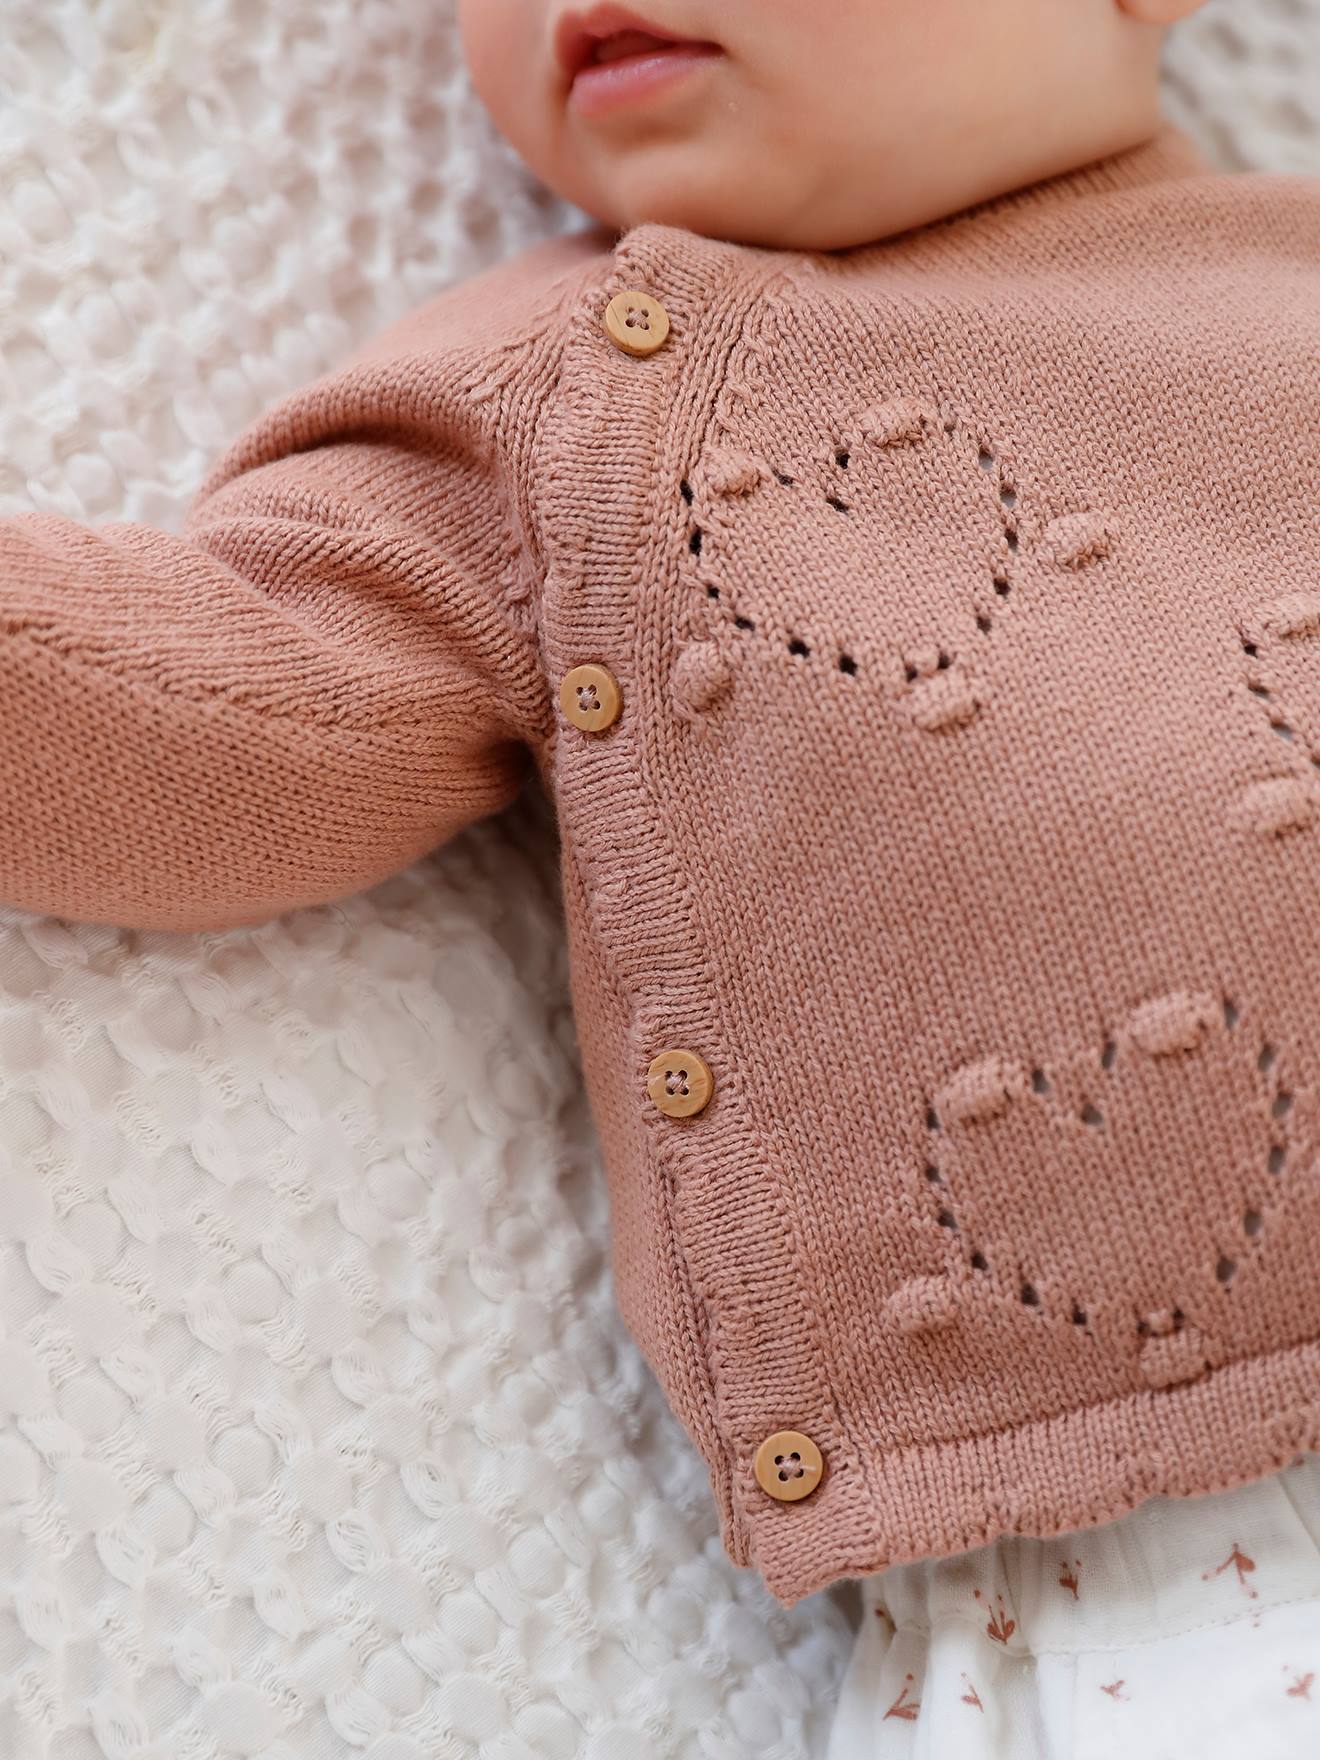 Infant Baby Girl Winter Clothes Long Sleeve Knitted Sweater Solid Plain Button Down Outerwear Cardigan 